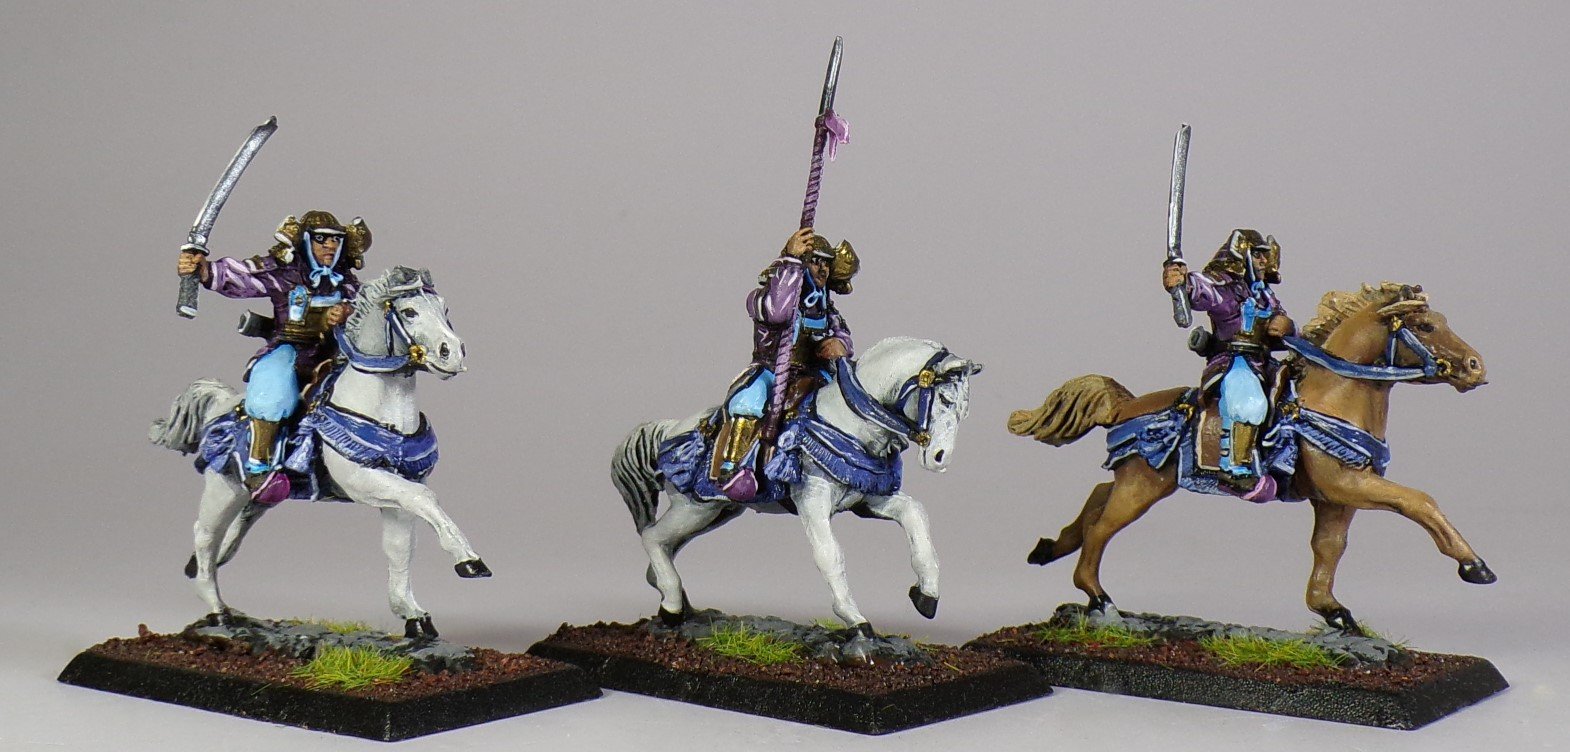 L5R Legend of the Five Rings Miniature Painting Service Paintedfigs (2).jpg